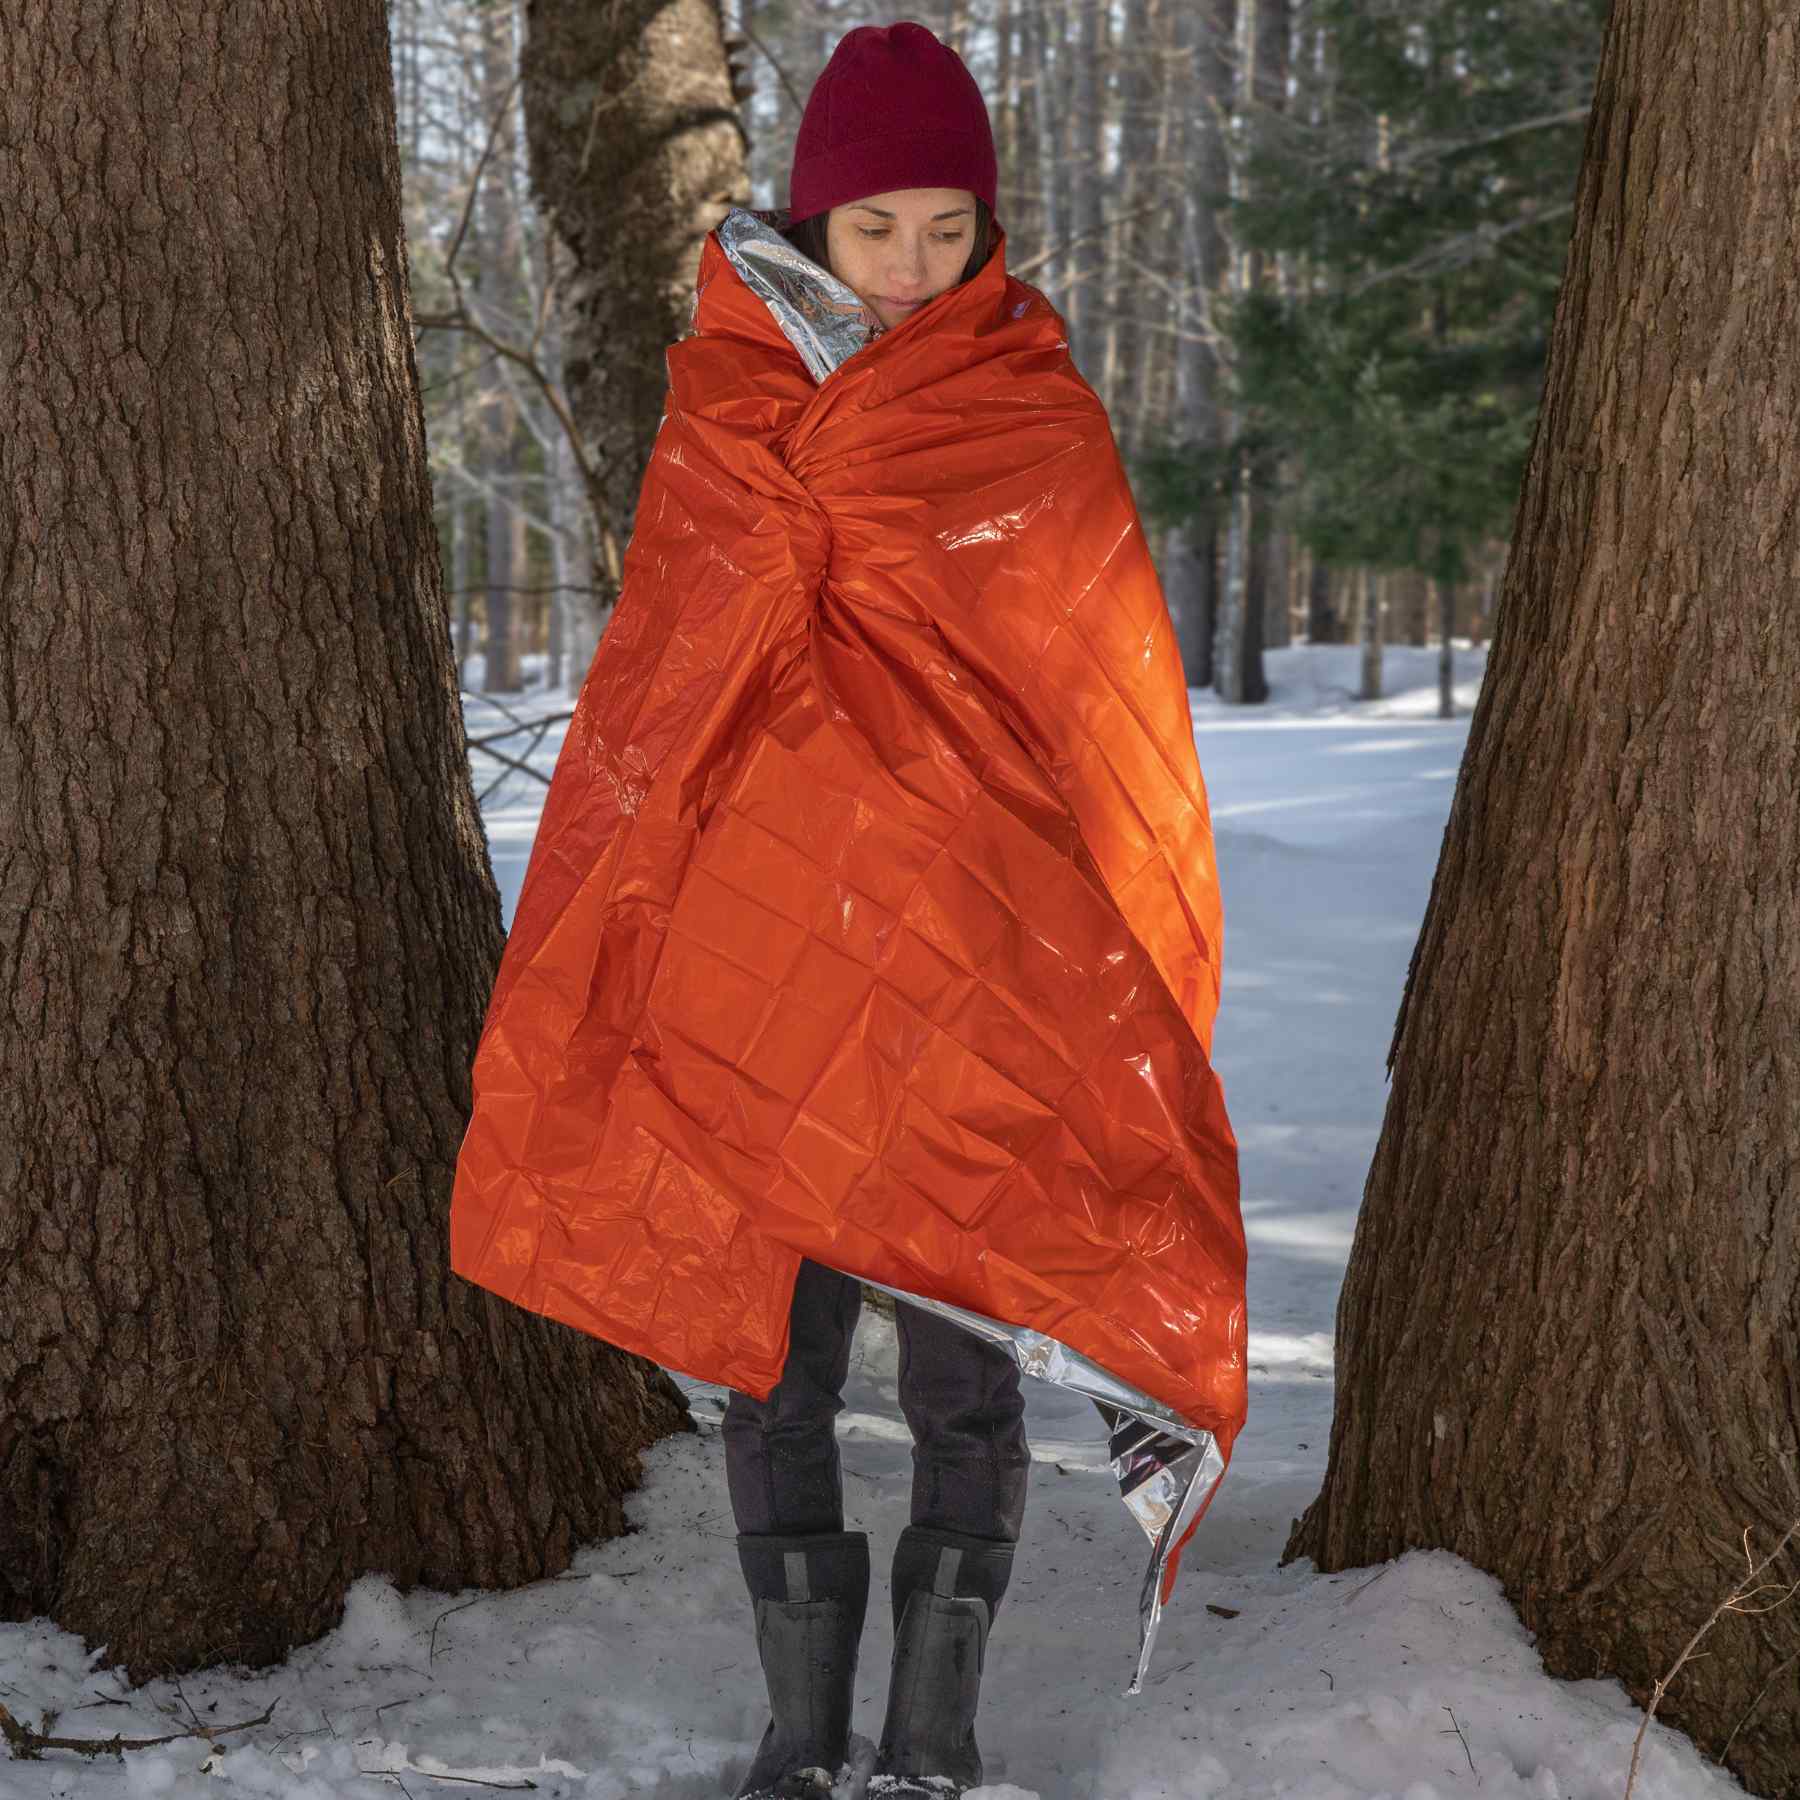 Emergency Blanket woman wrapped in blanket with large trees around her